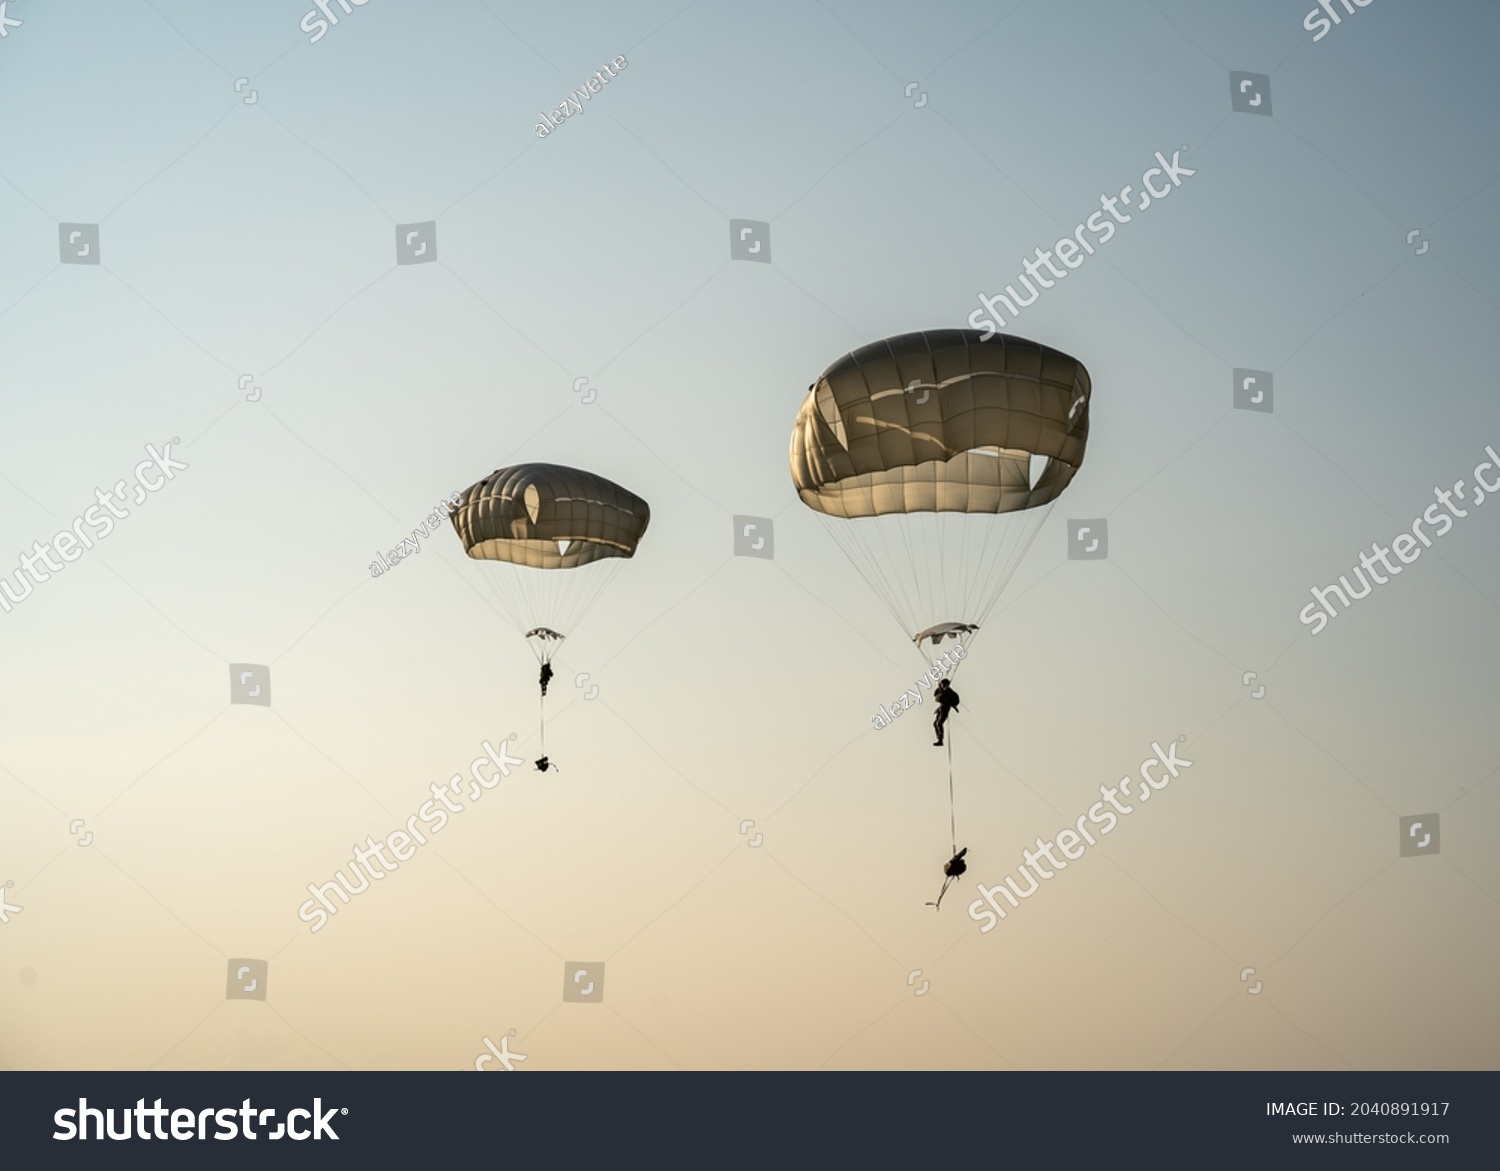 United States Army Soldiers and Paratroopers descending in the sky, from an Air Force C-130 military aircraft during an Airborne Operation. #2040891917